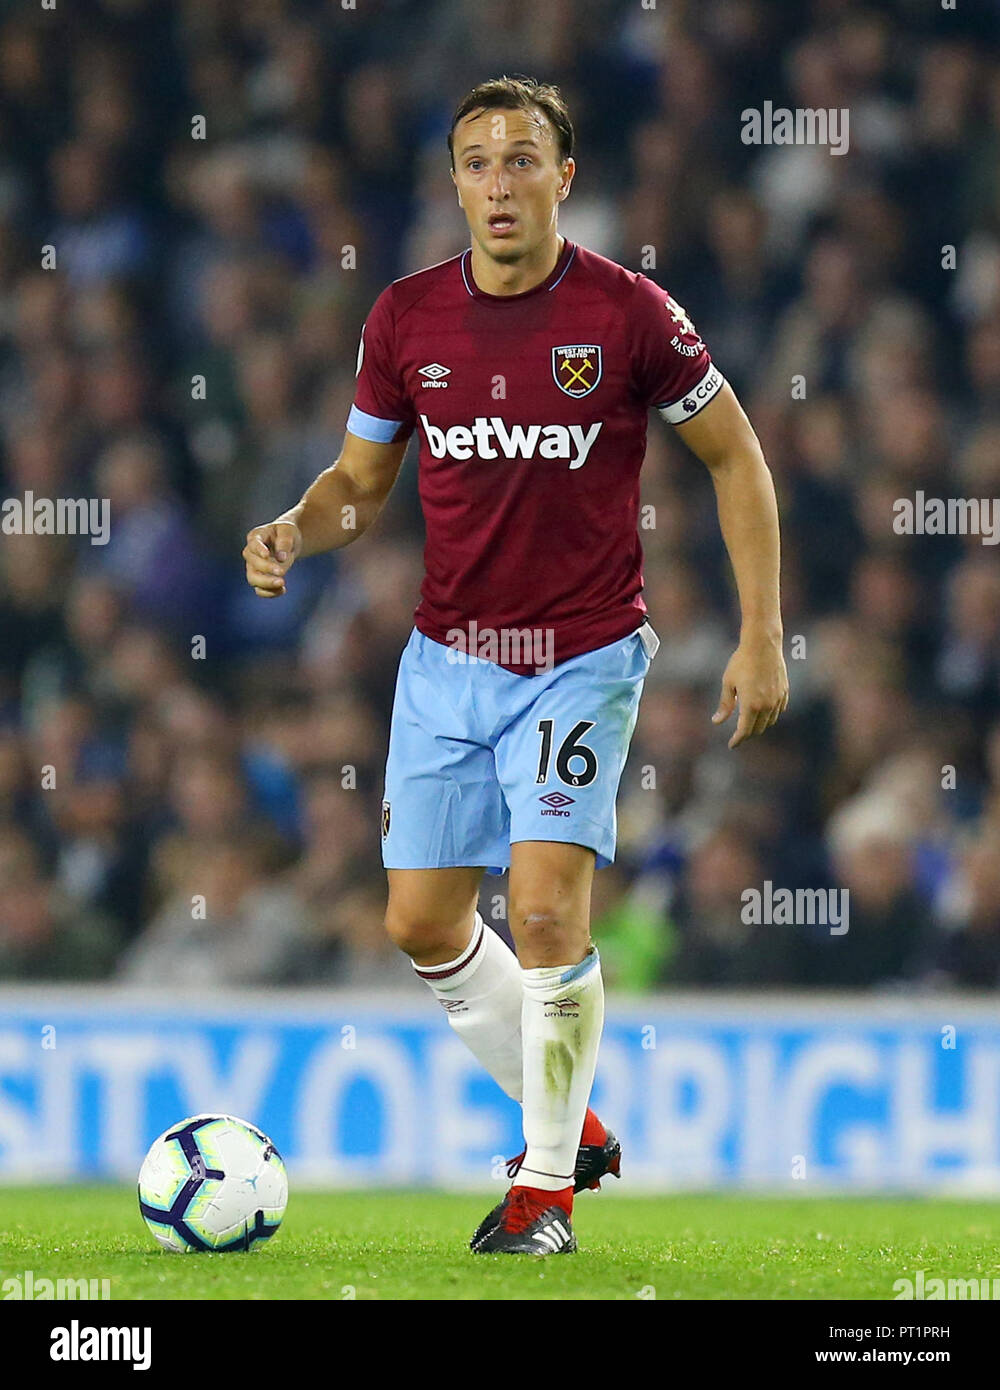 West Ham United's Mark Noble during the Premier League match at the AMEX Stadium, Brighton. PRESS ASSOCIATION Photo. Picture date: Friday October 5, 2018. See PA story SOCCER Brighton. Photo credit should read: Gareth Fuller/PA Wire. RESTRICTIONS: No use with unauthorised audio, video, data, fixture lists, club/league logos or 'live' services. Online in-match use limited to 120 images, no video emulation. No use in betting, games or single club/league/player publications. Stock Photo